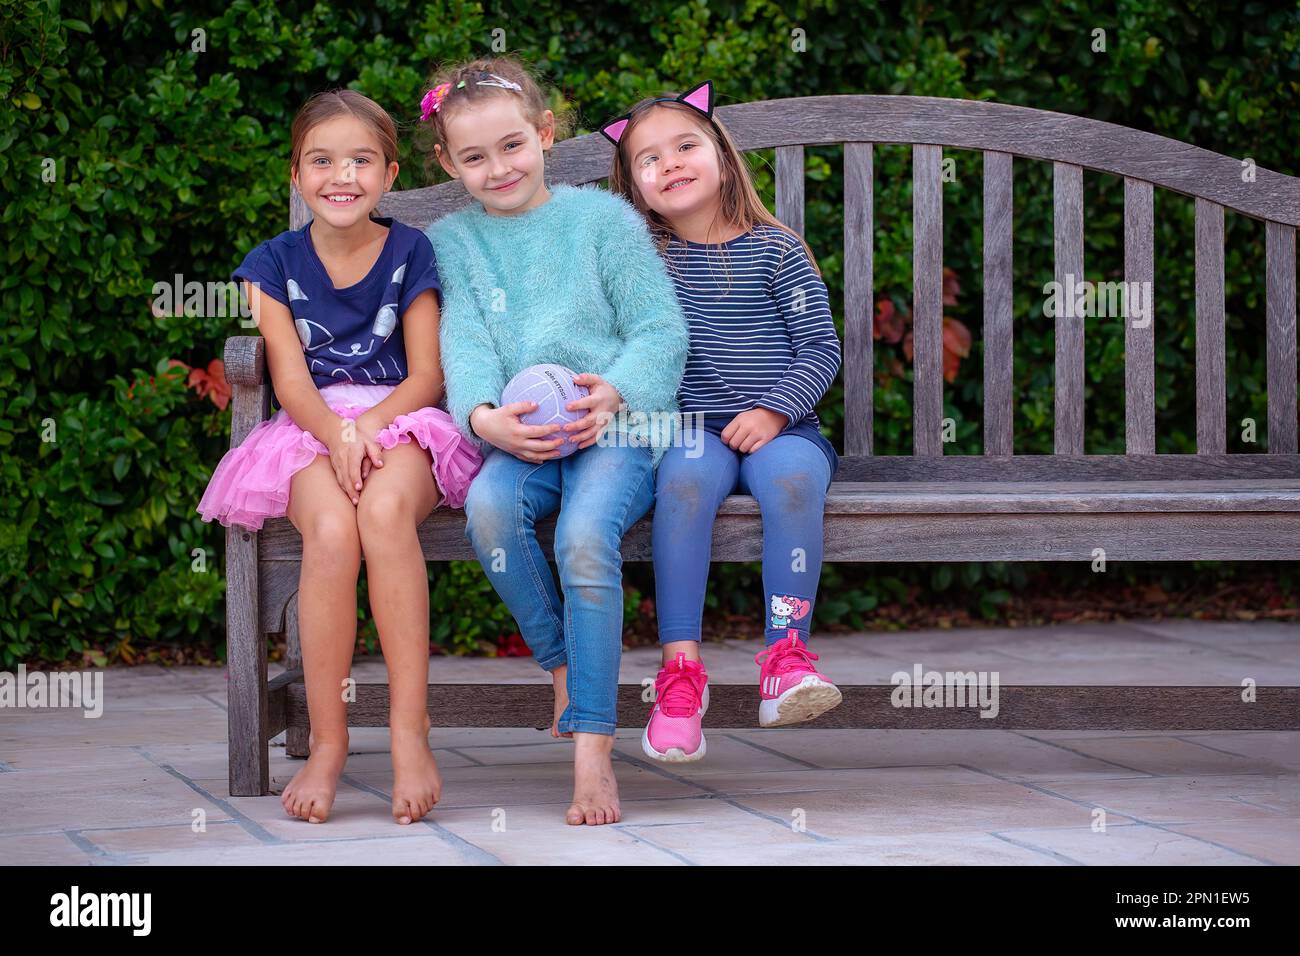 Three young girl friends on a bench Stock Photo